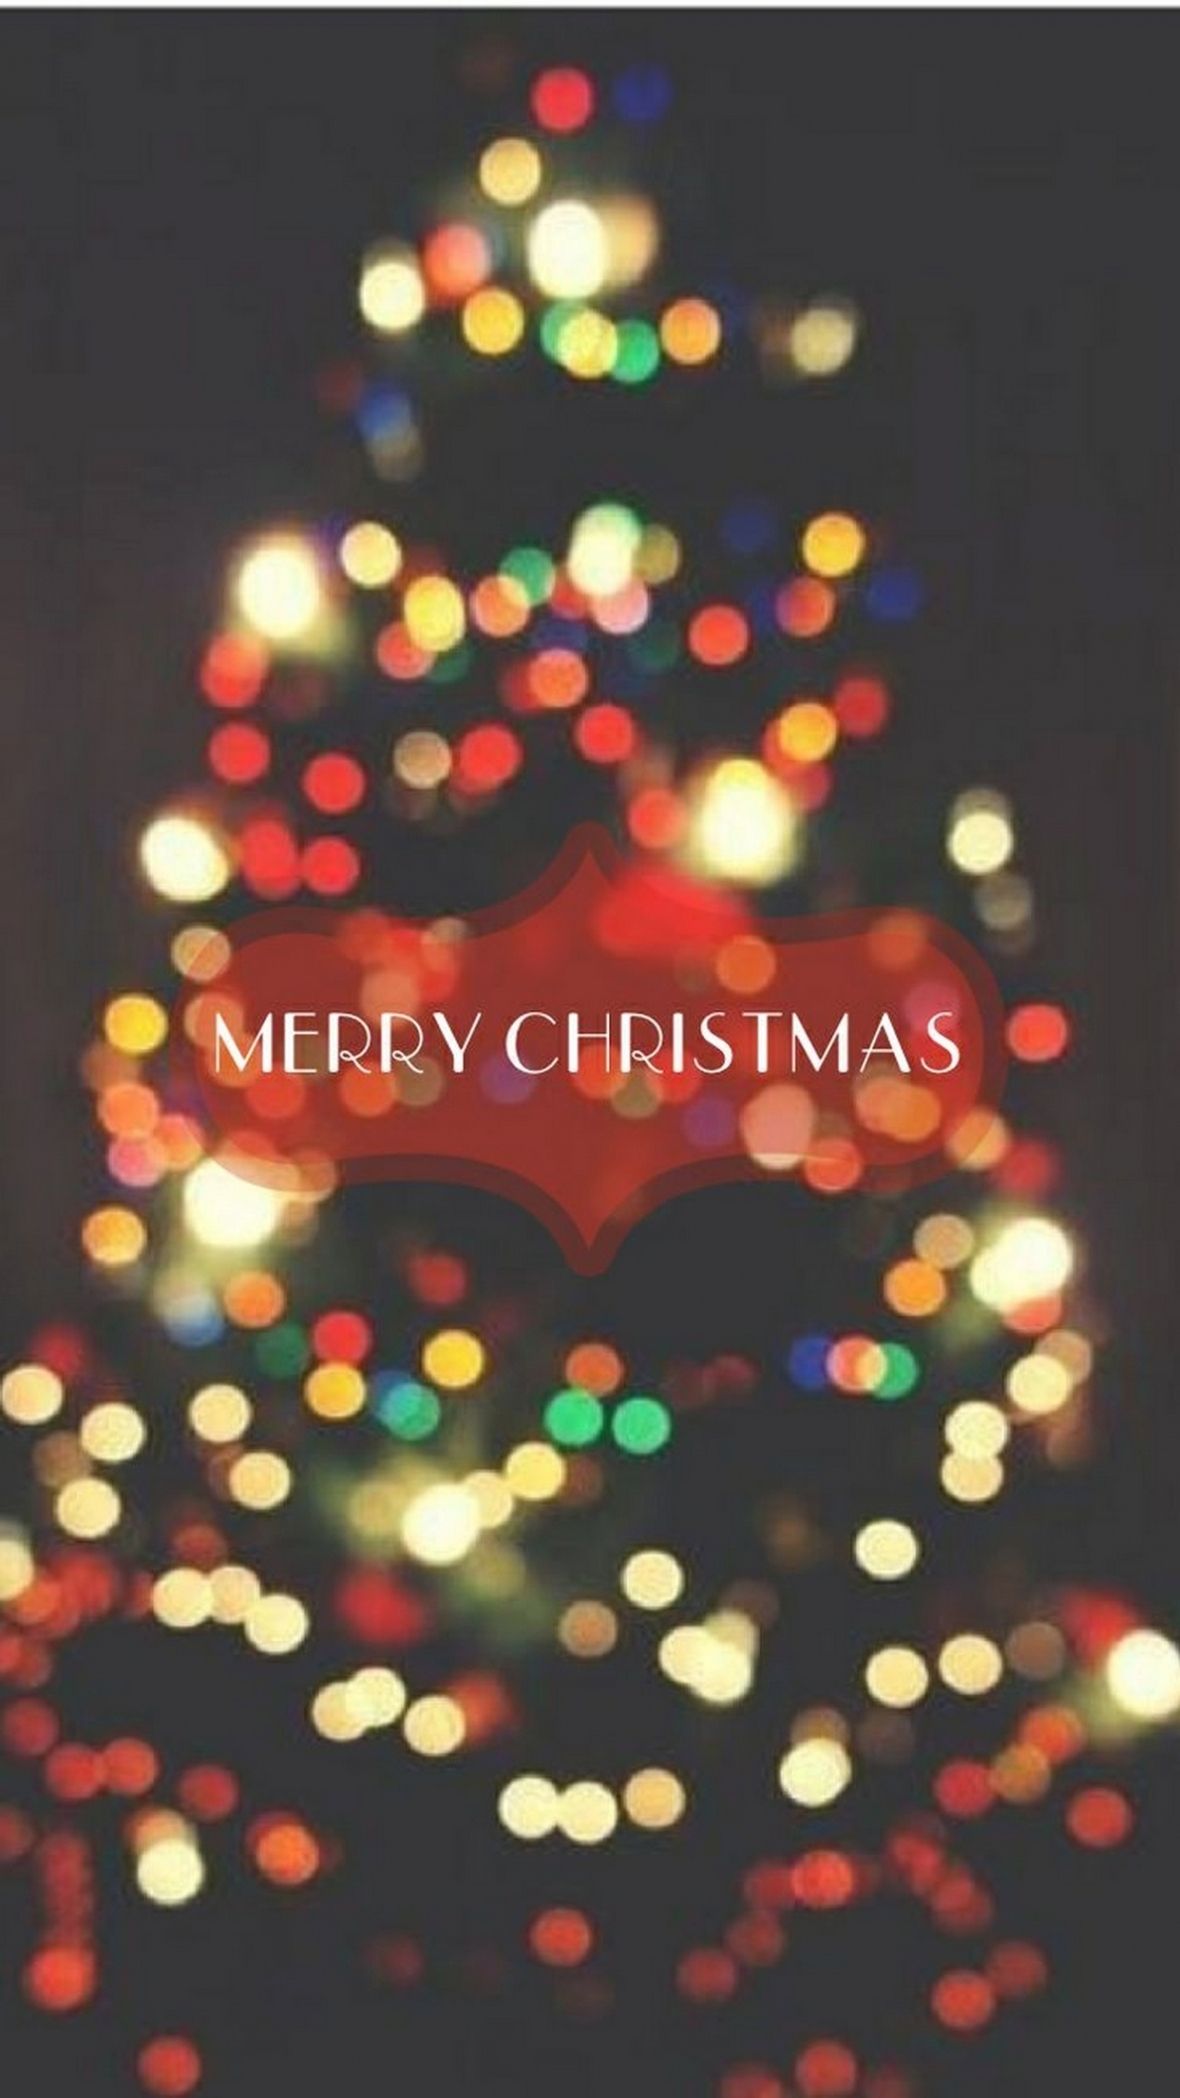 cool 30 Christmas Wallpaper For iPhones intended for Awesome iPhone 4 HD Wallpaper Chri. Christmas wishes messages, Christmas wishes quotes, Xmas wishes messages